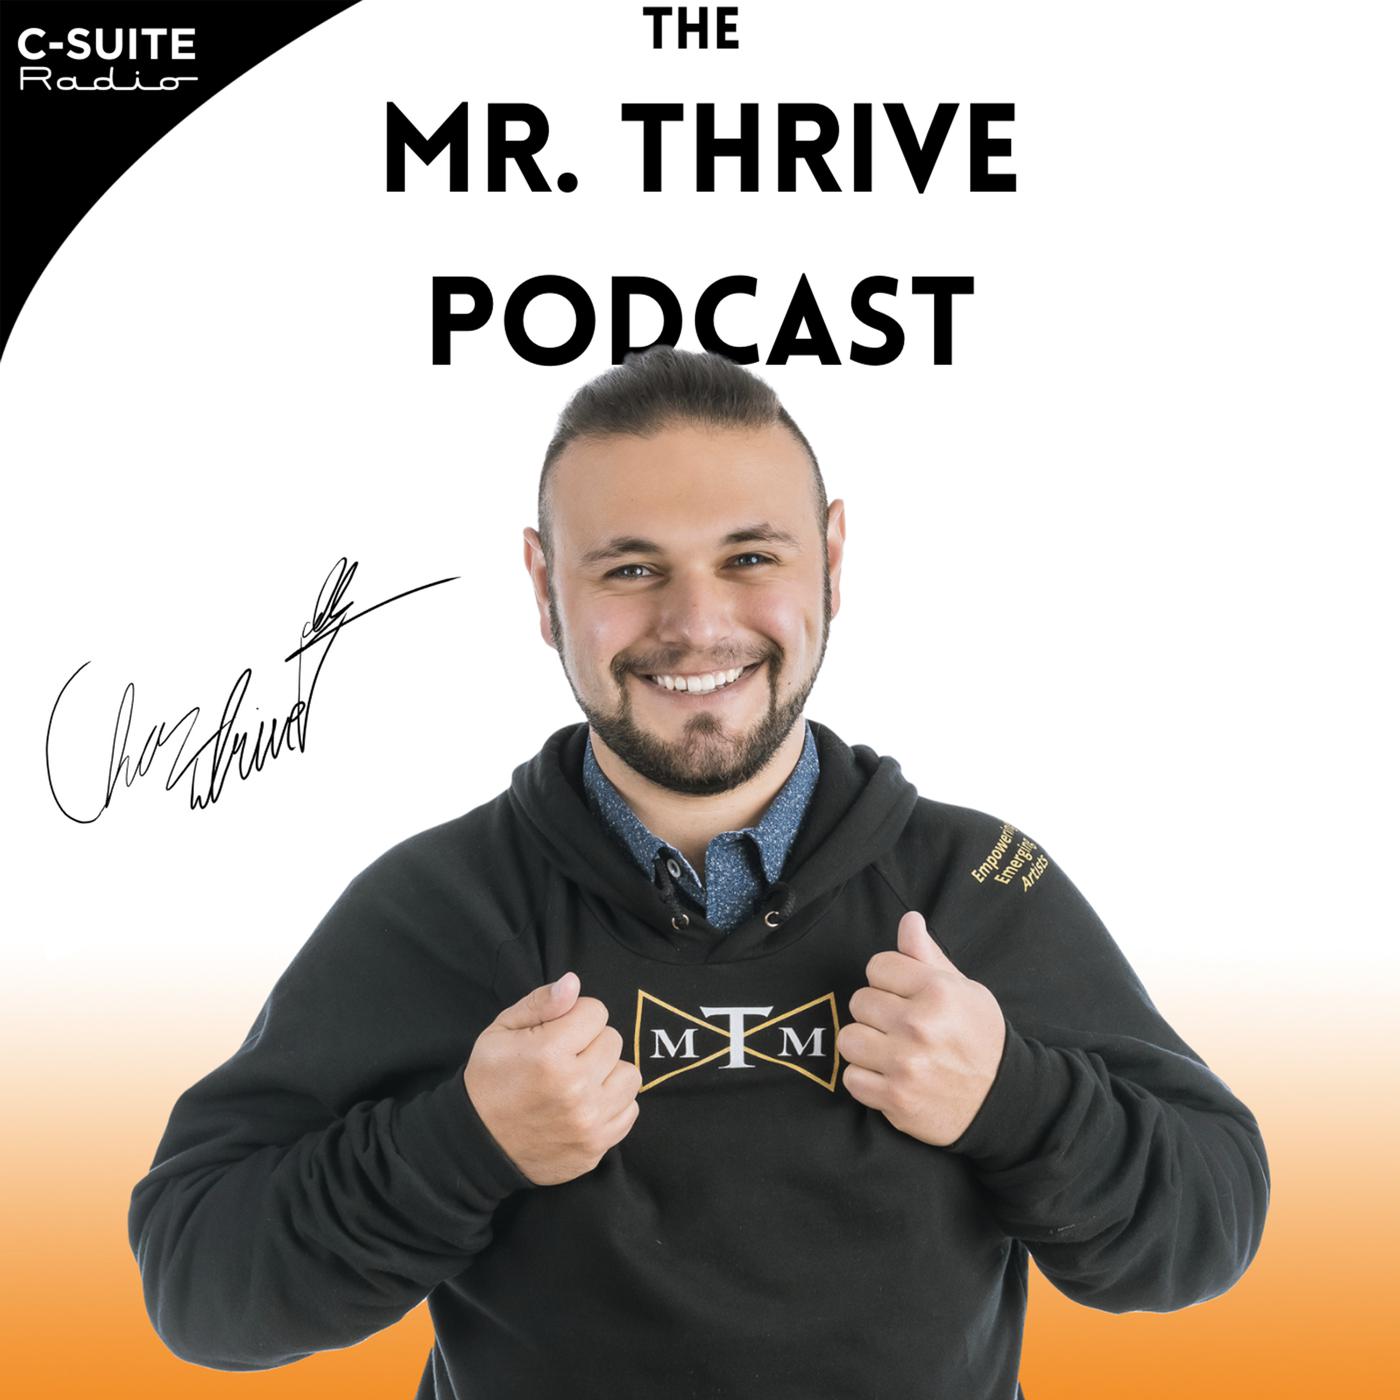 The Mr. Thrive Podcast